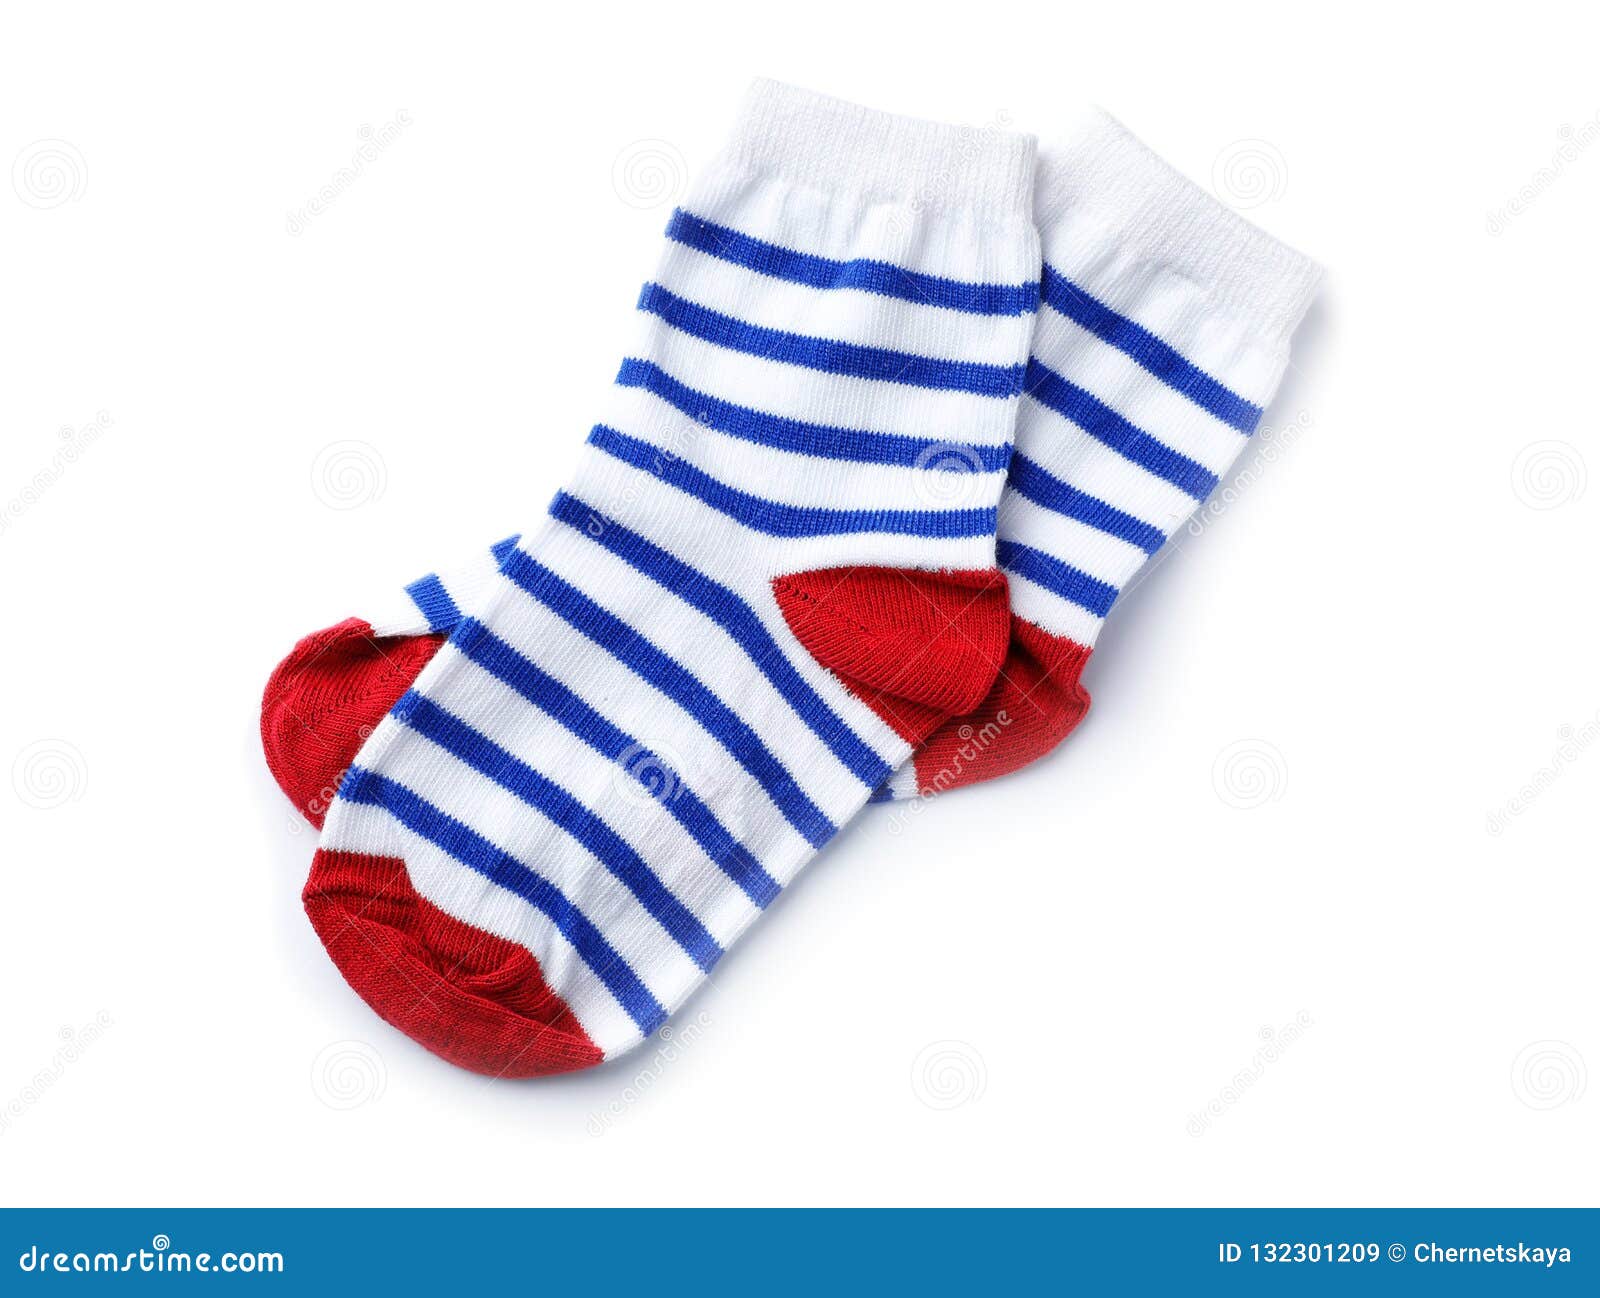 Cute Child Socks on White Background Stock Image - Image of blue, look ...